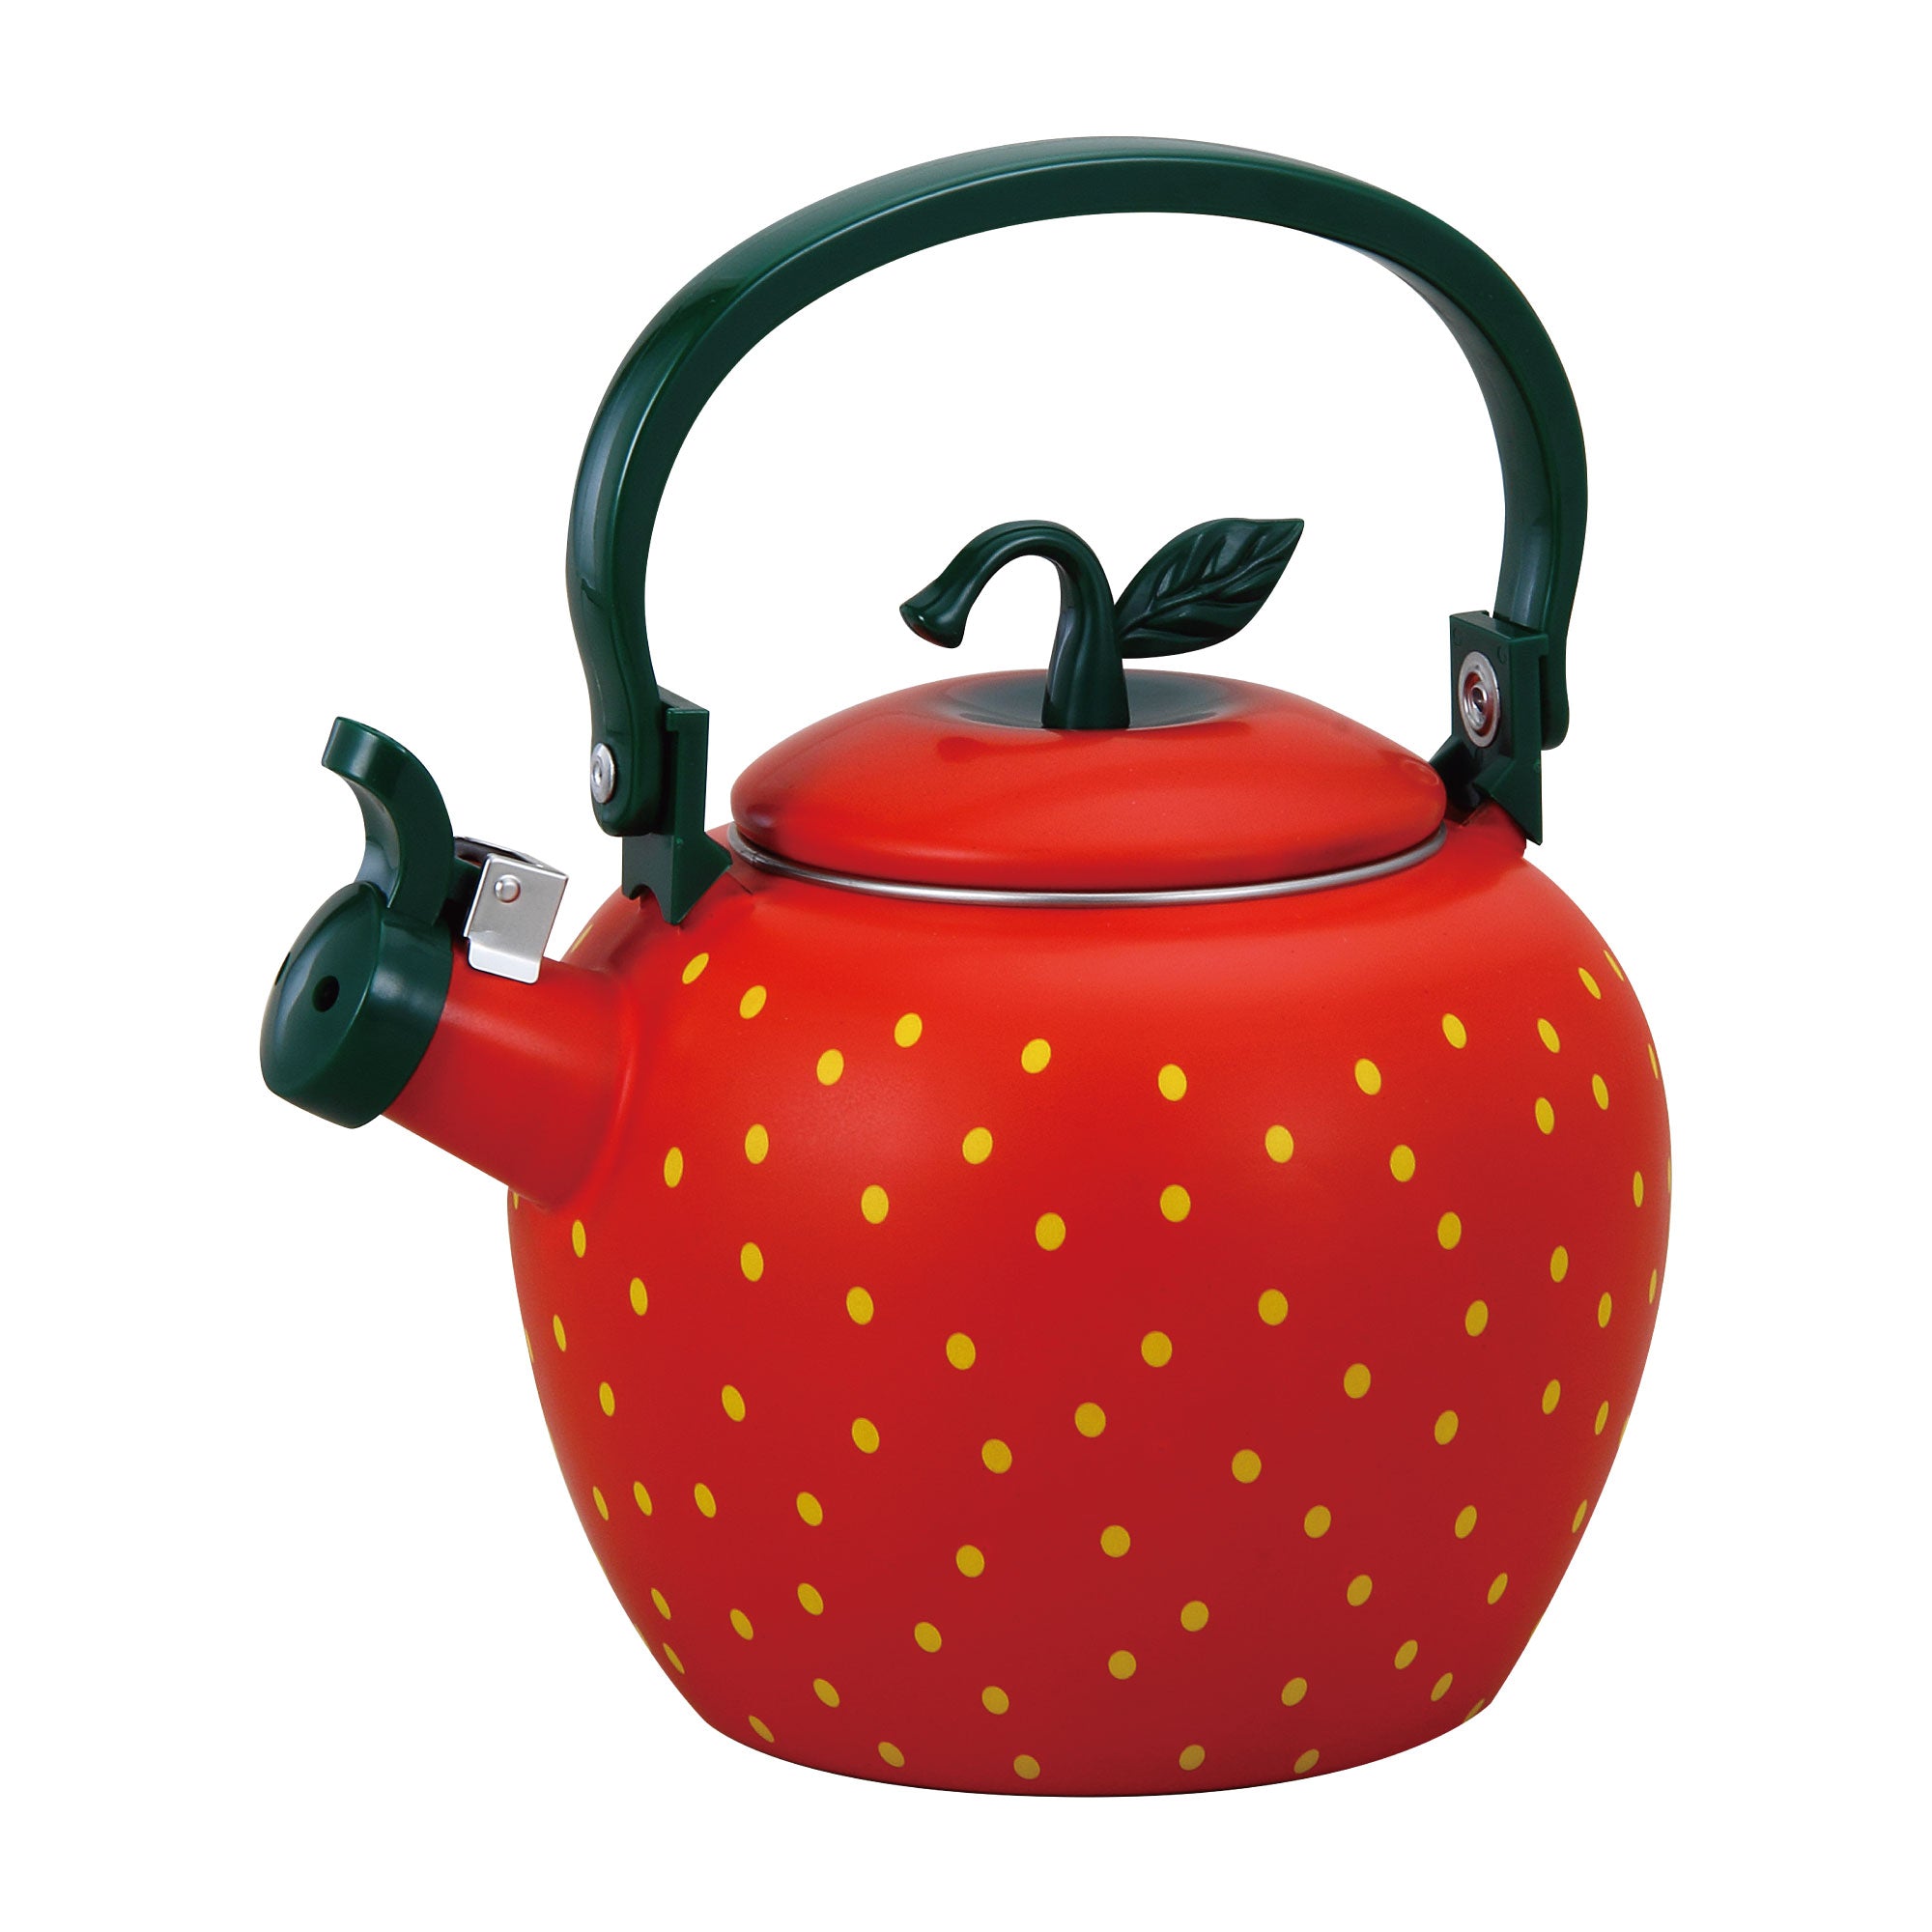 Cow Whistling Tea Kettle, Cute Animal Teapot, Kitchen Accessories